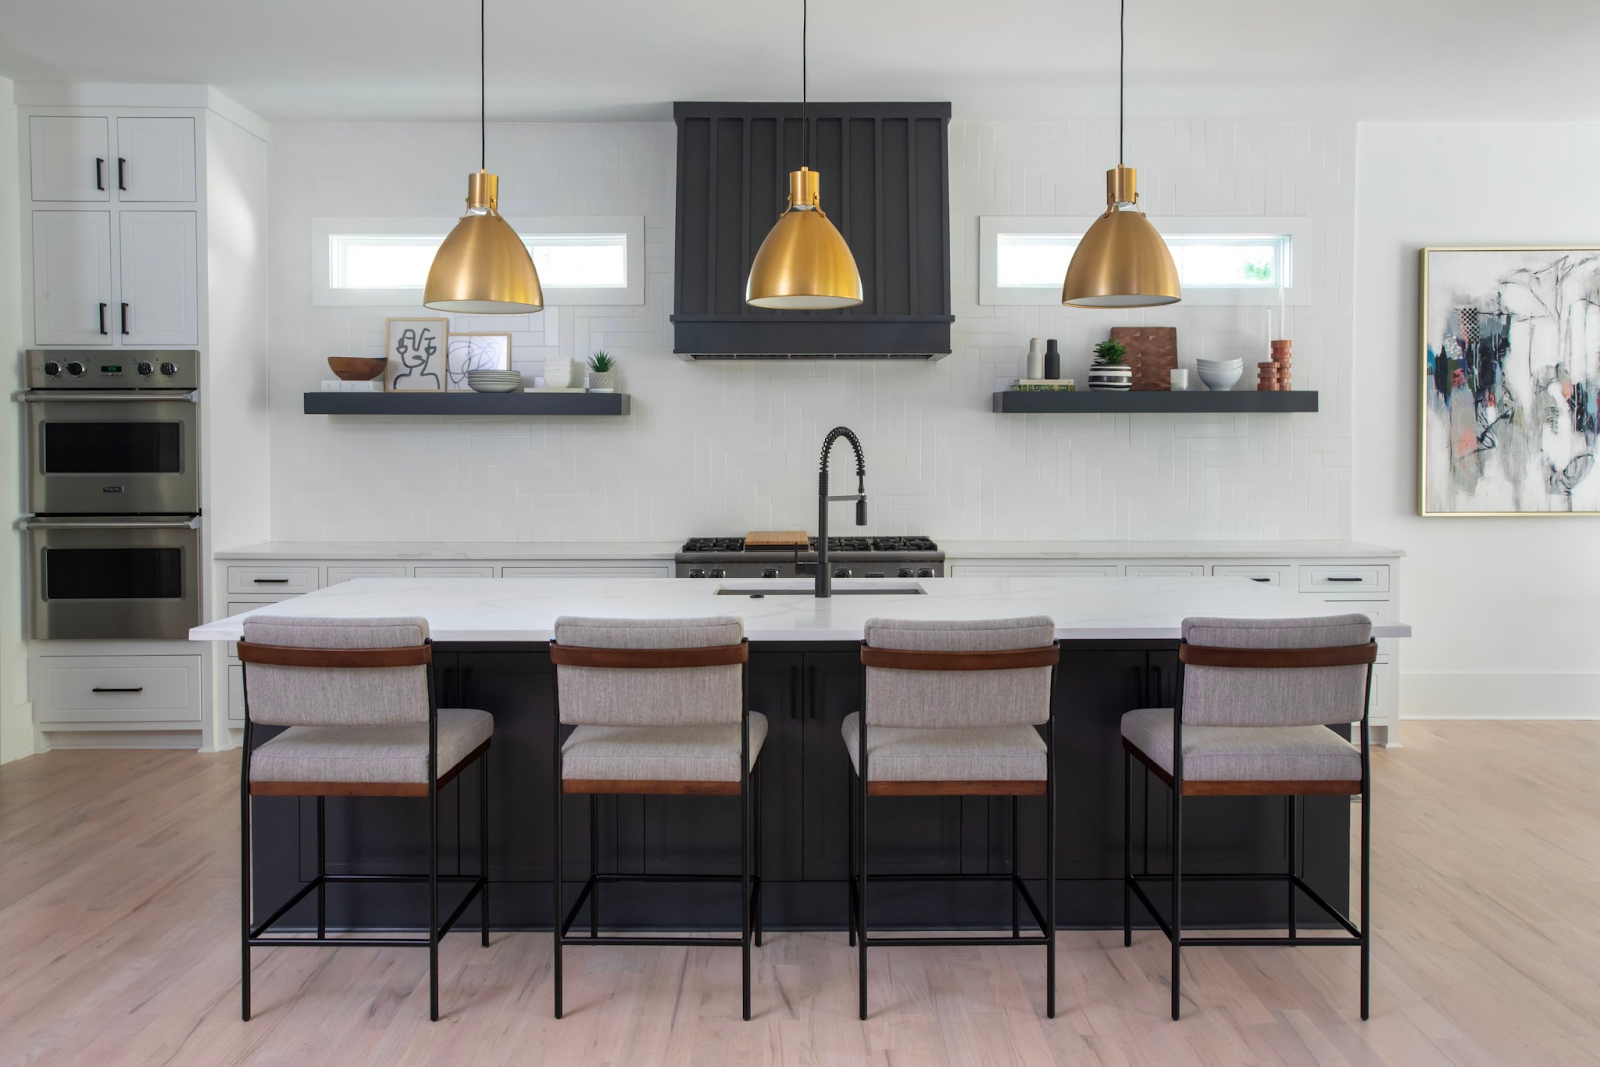 Three gold metal kitchen island pendants hanging over a white kitchen island with 4 gray and brown chairs. In background is ceramics and art sitting on shelves, a black sink and faucet, and black stove. 